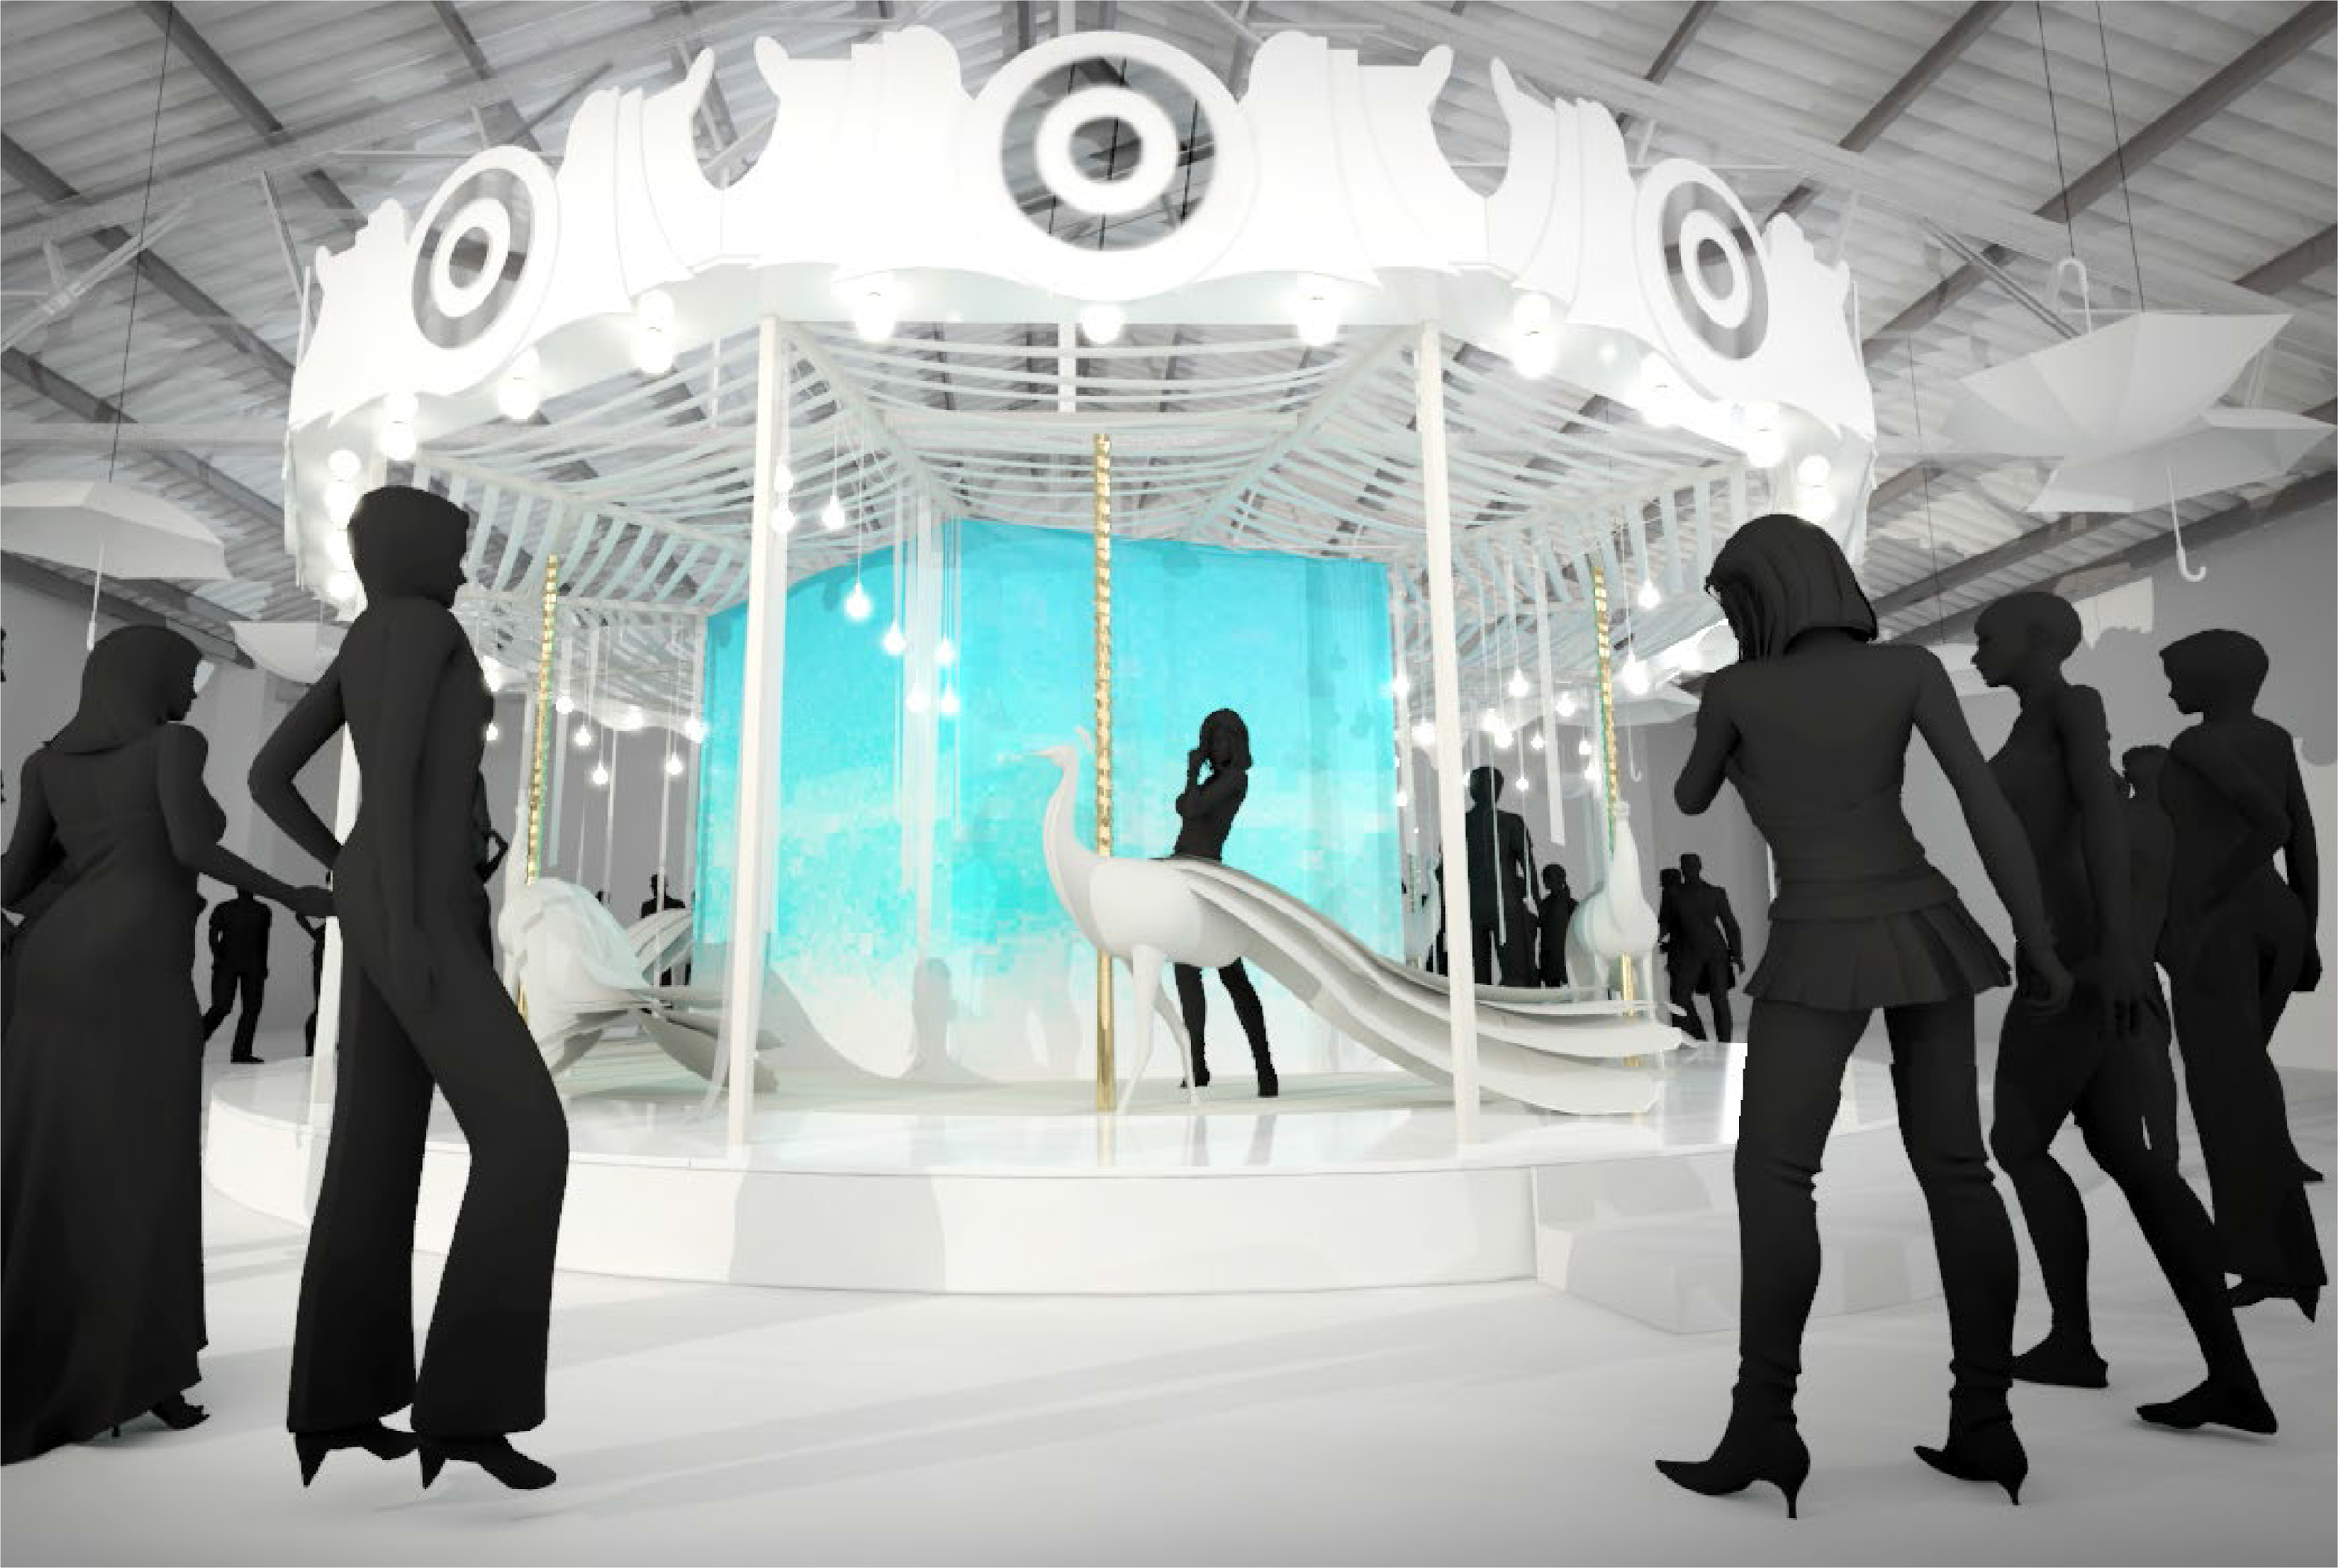 Target, in Vogue NYFW Kickoff Event 2015: Carousel Rendering